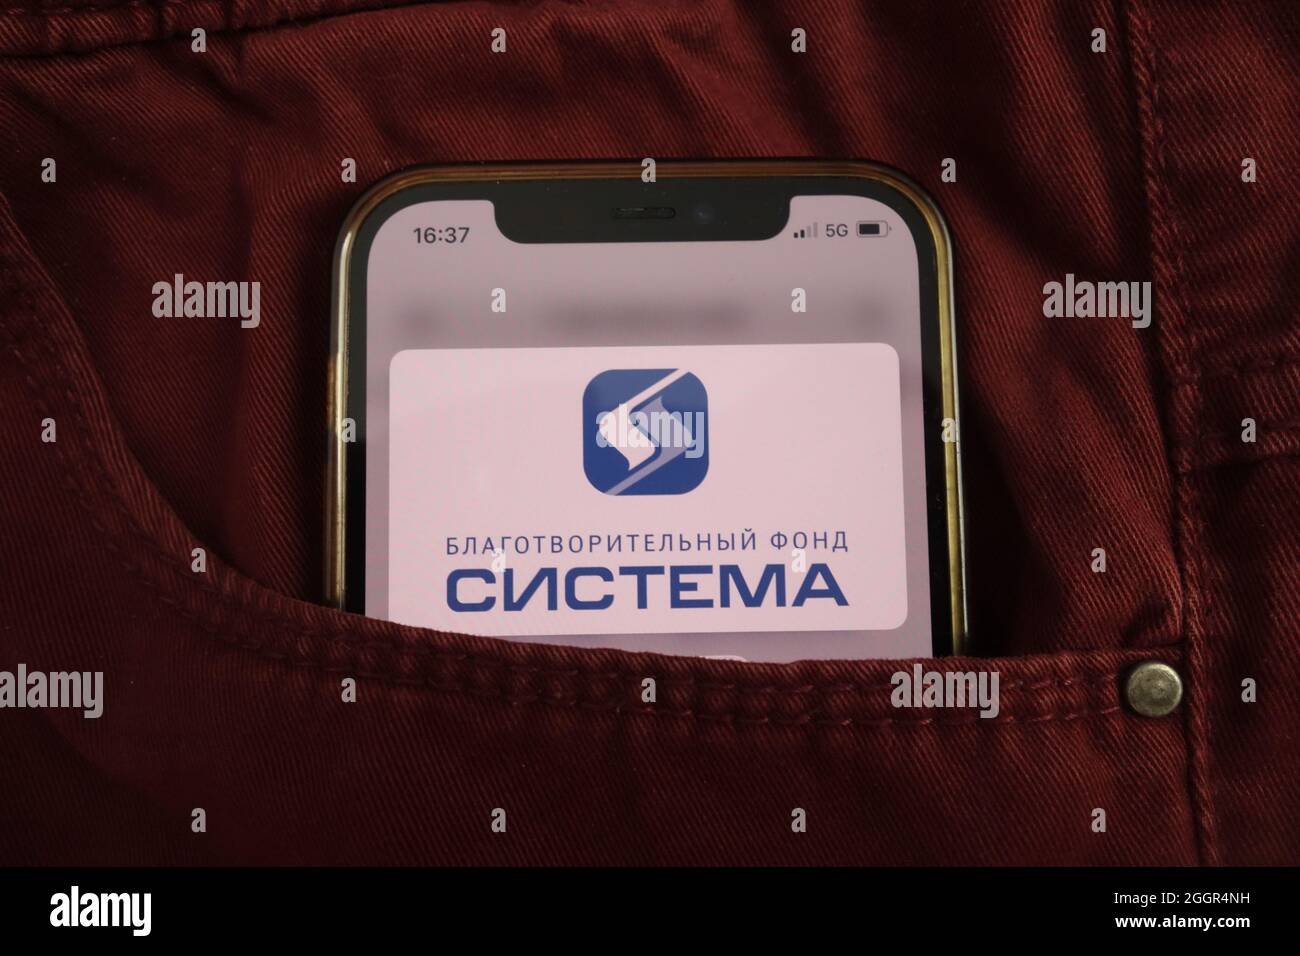 KONSKIE, POLAND - August 17, 2021: AFK Sistema PAO logo displayed on mobile phone hidden in jeans pocket Stock Photo